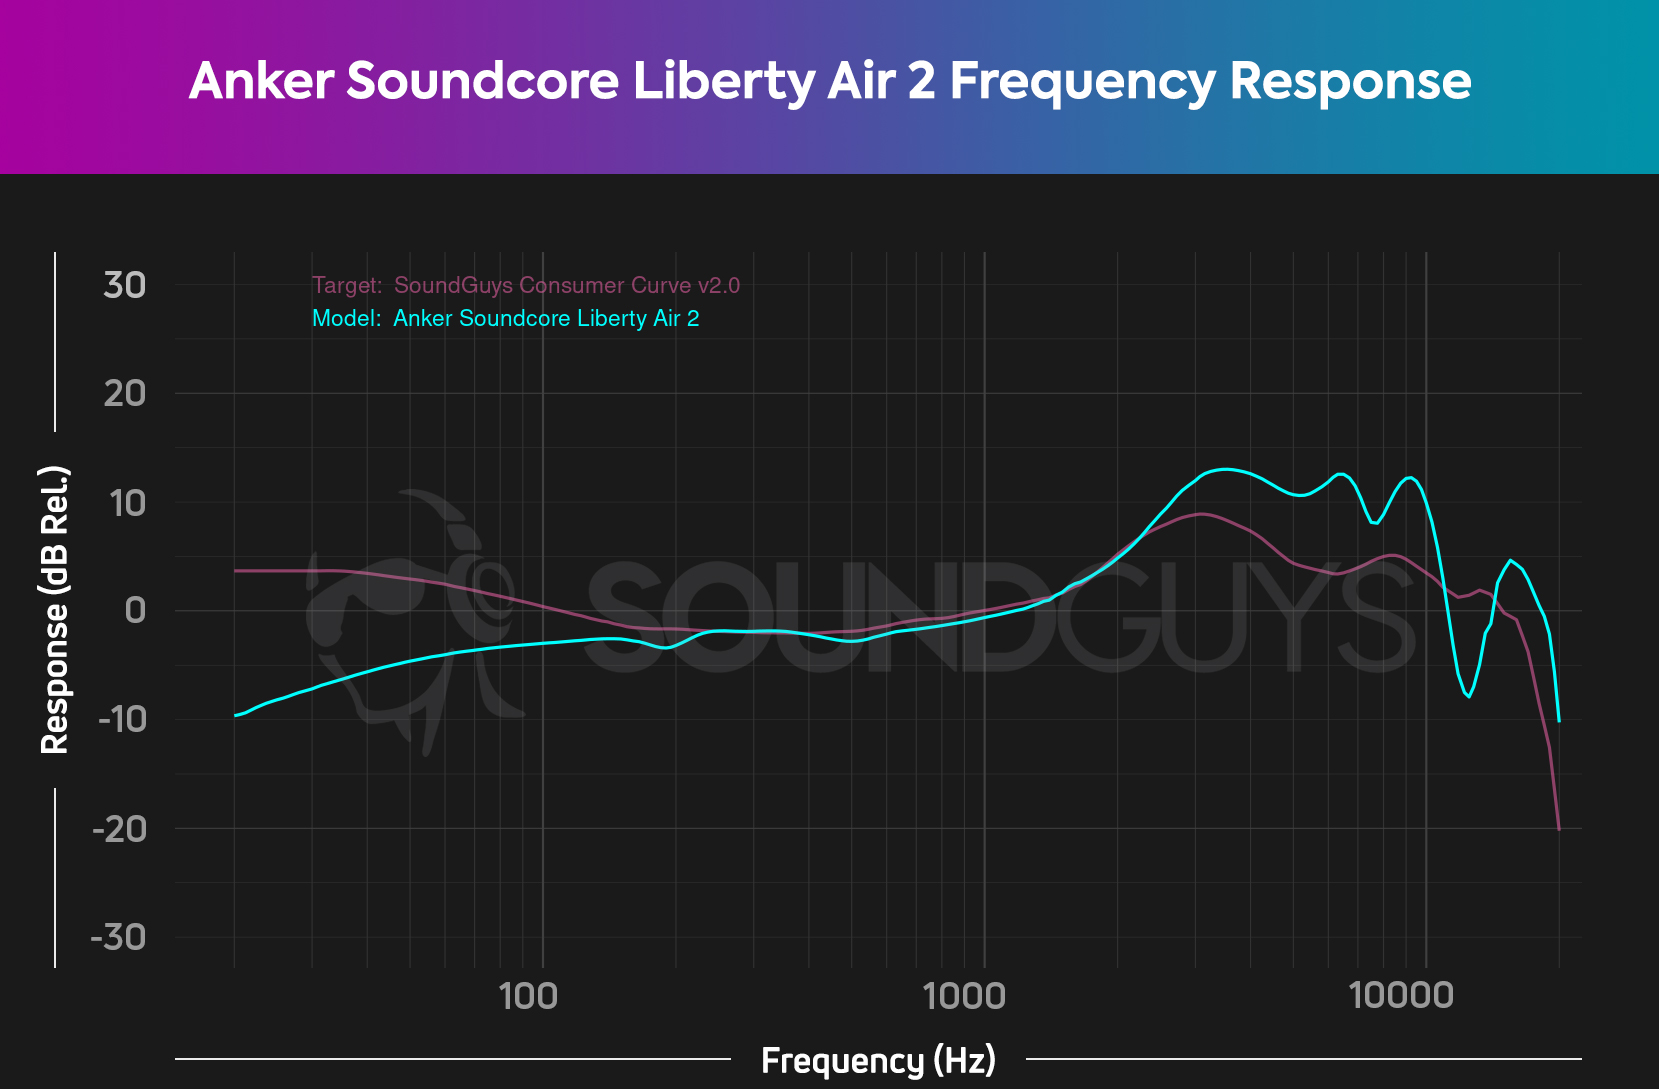 A chart depicts the Anker Soundcore Liberty Air 2 frequency response relative to the SoundGuys Consumer Curve v2, showing that the earbuds have a quiet sub-bass response.